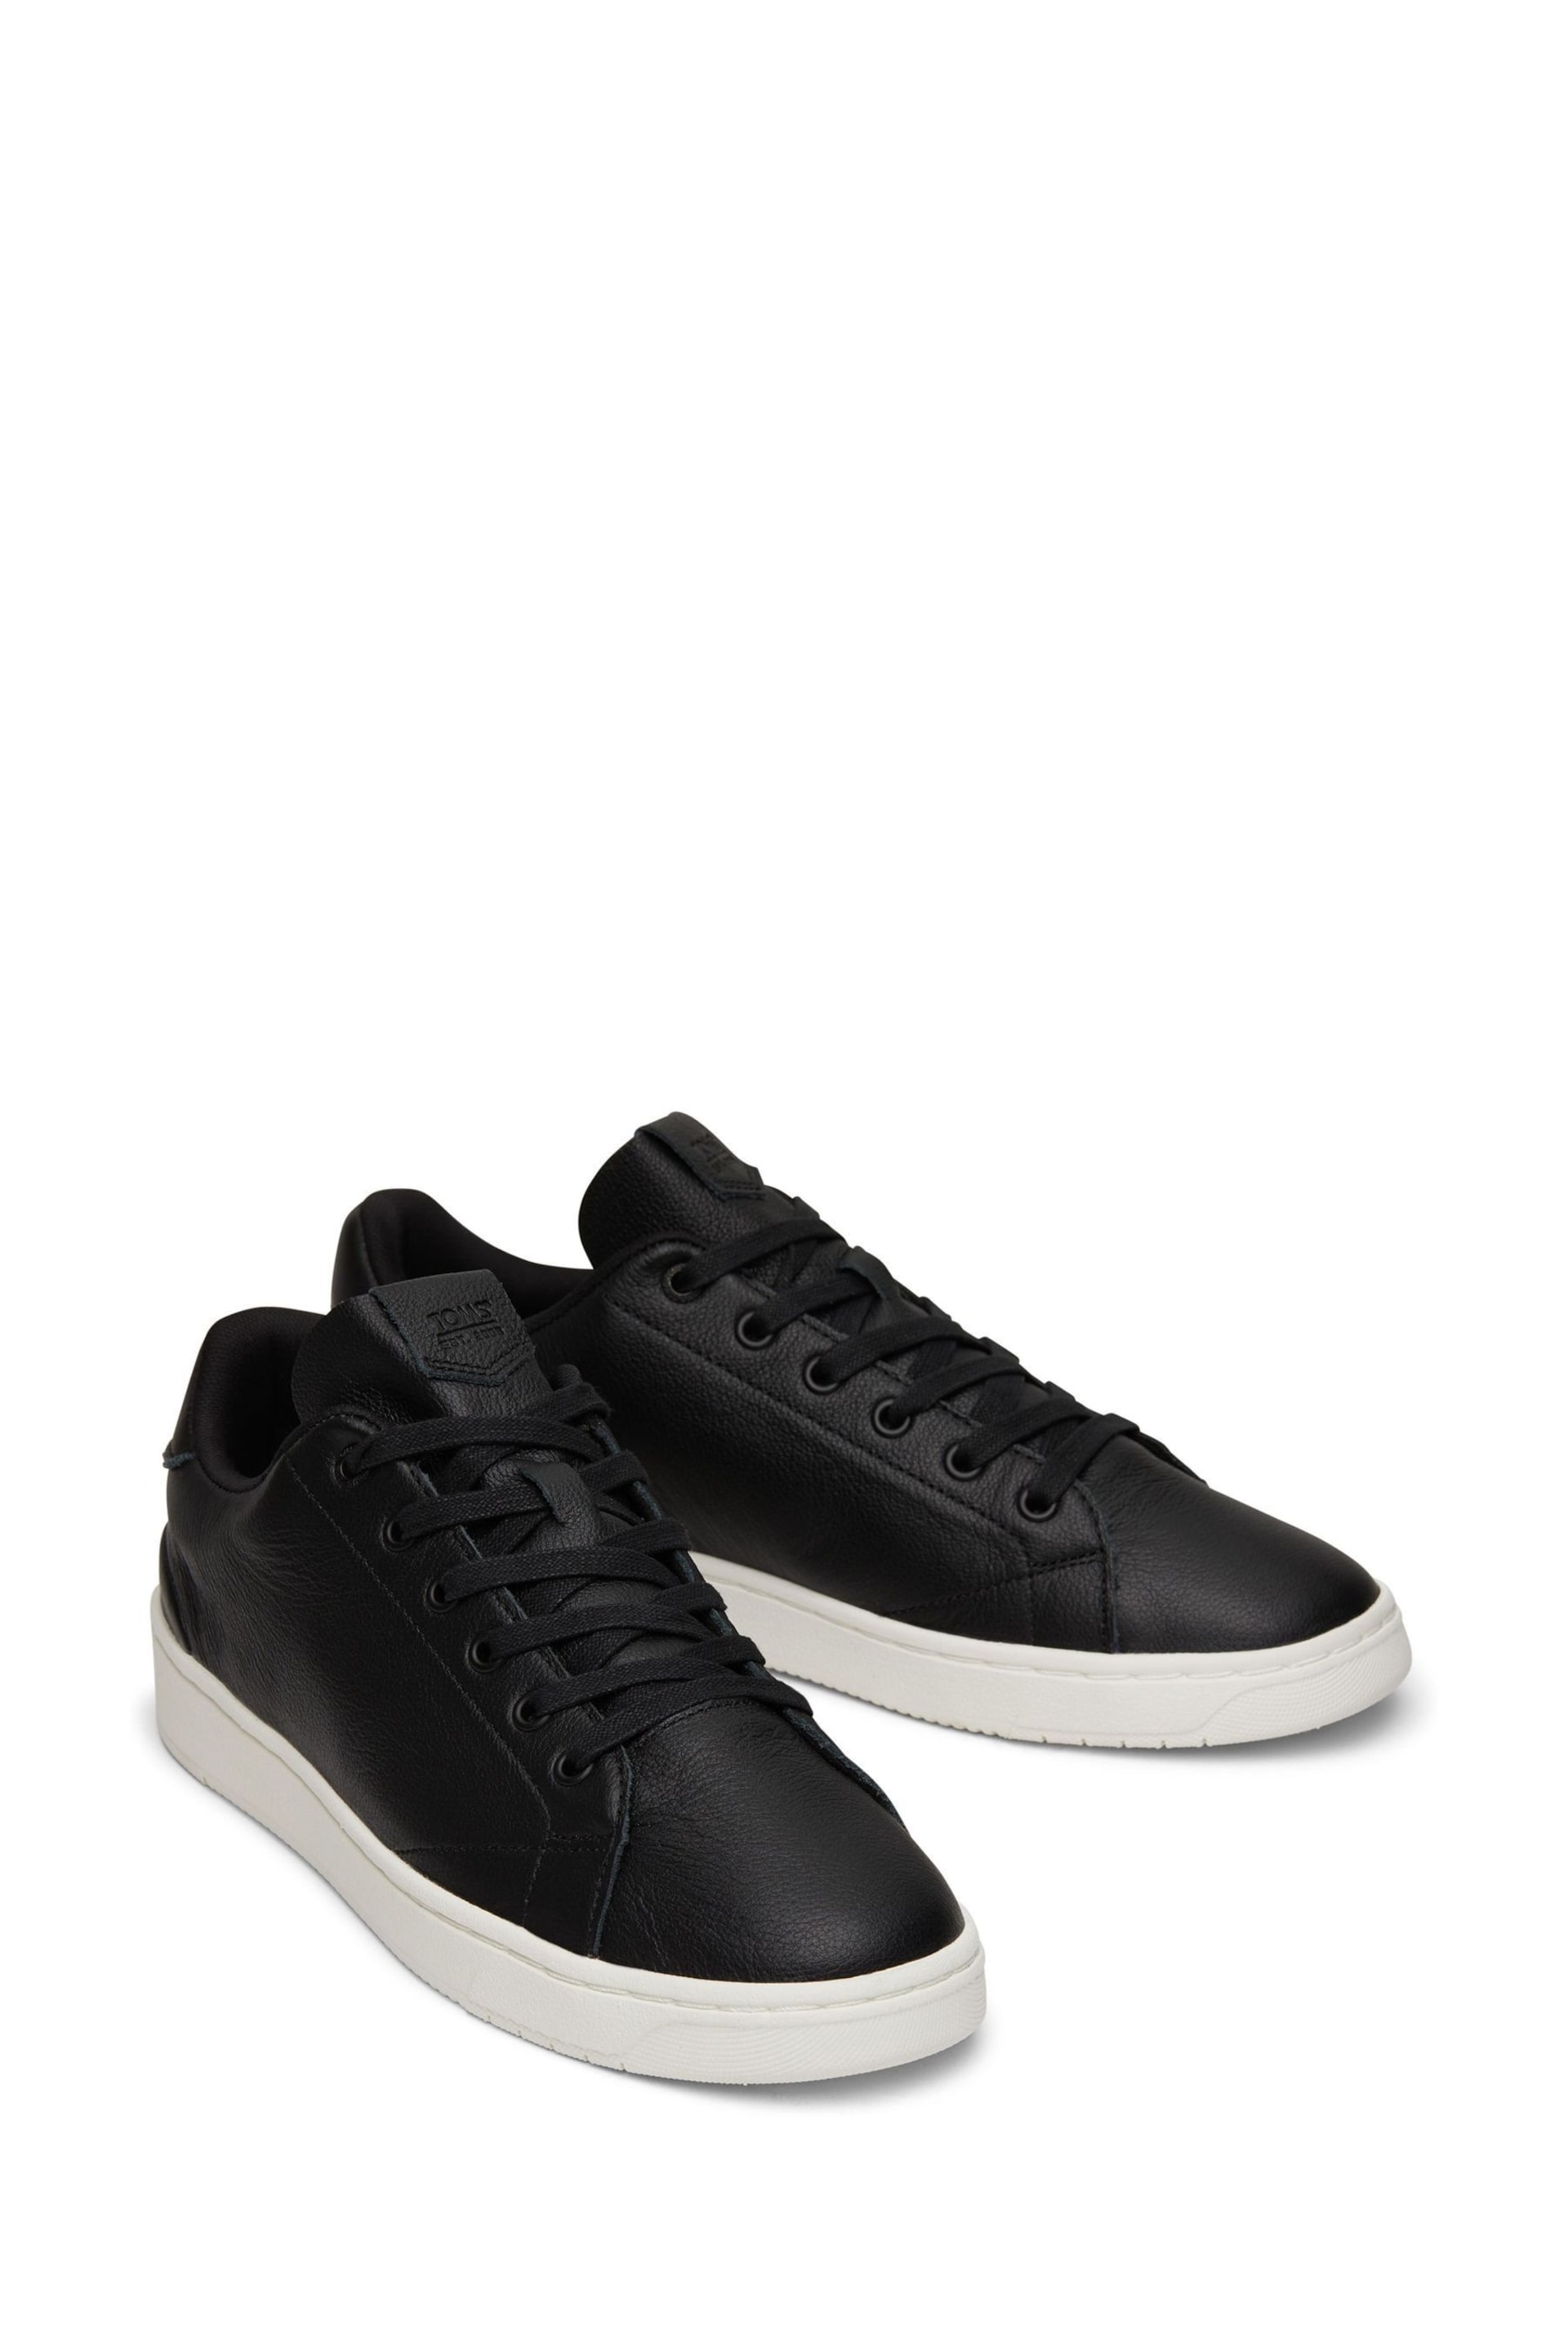 TOMS Travel Lite 2.0 Leather Trainers - Image 2 of 5